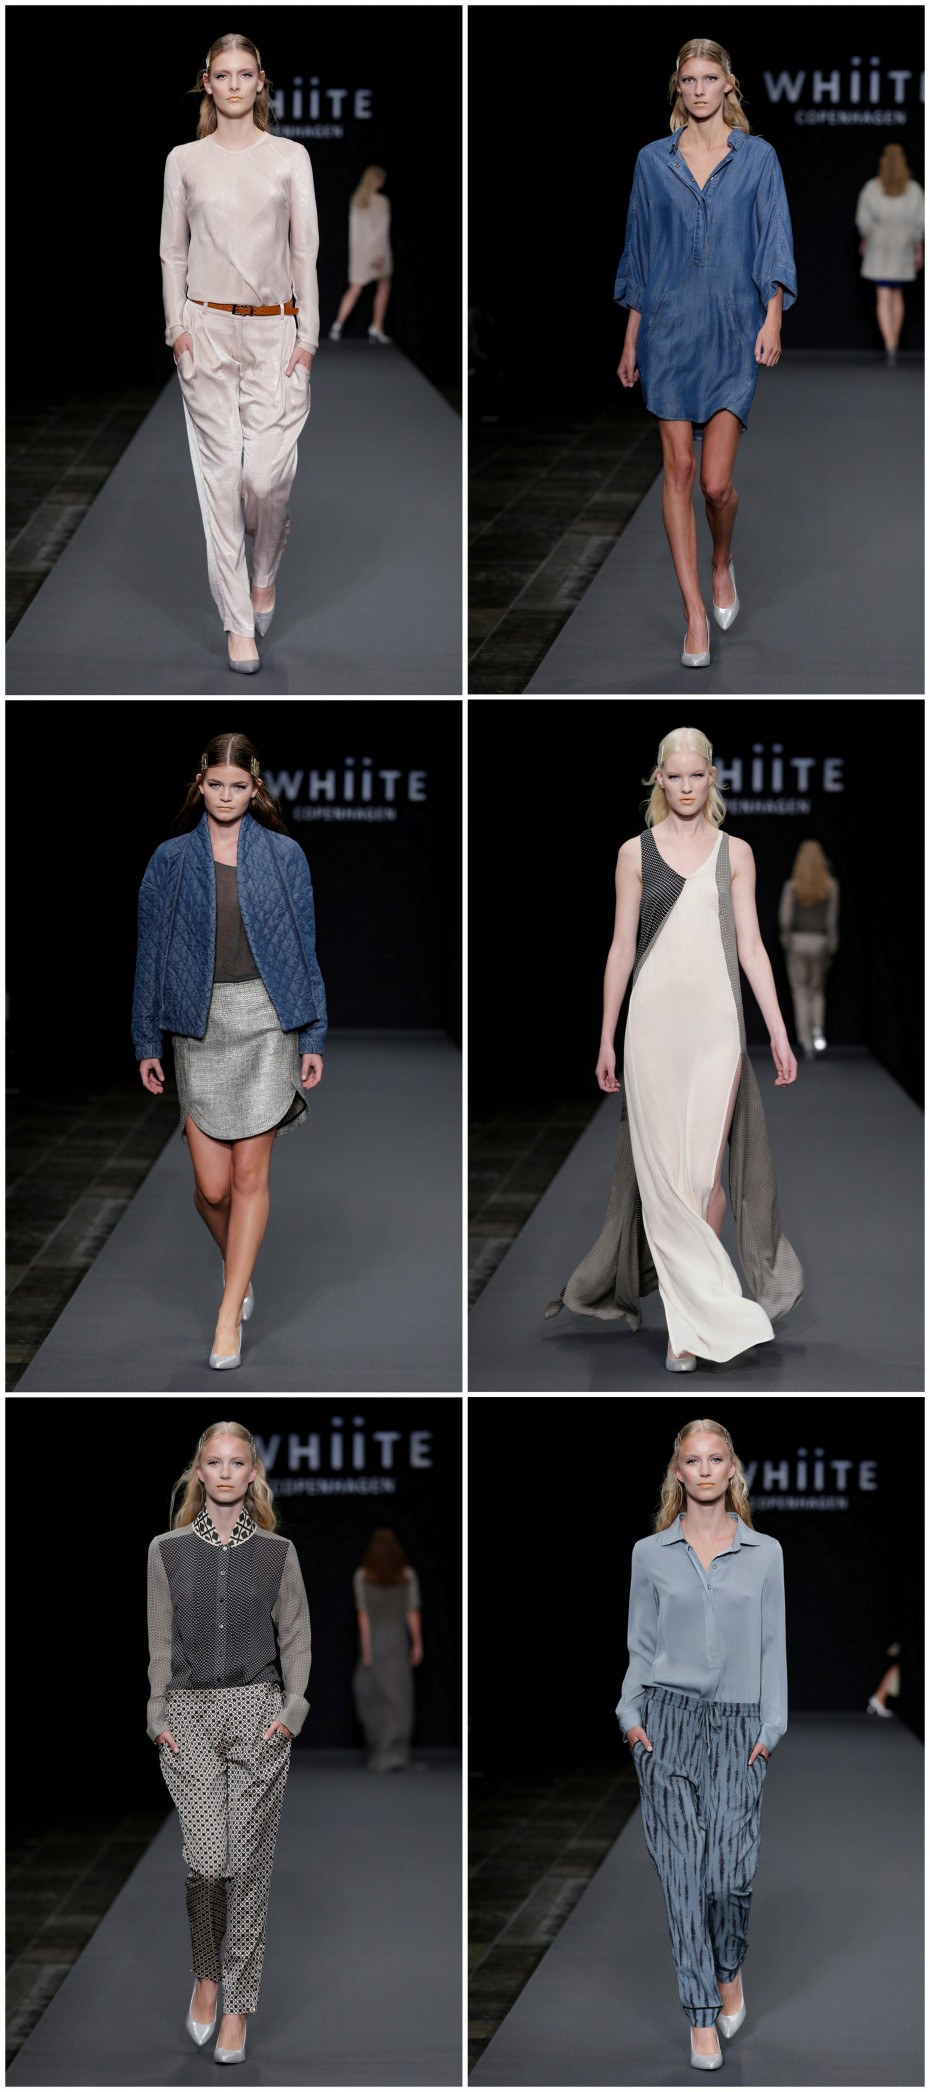 whiite ss14